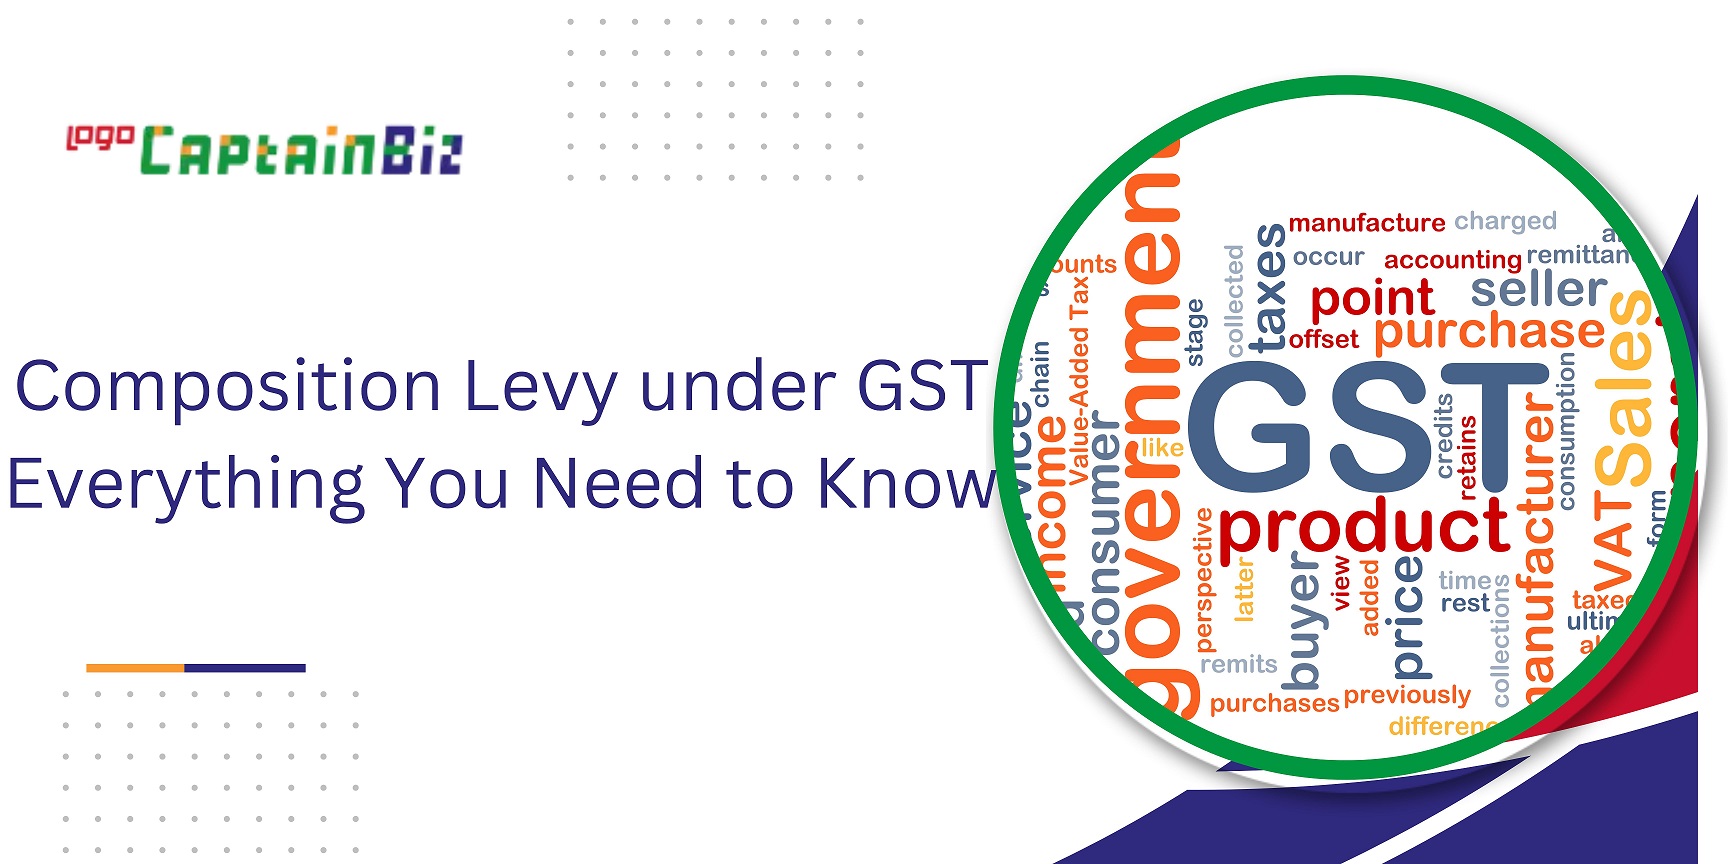 CaptainBiz: Composition Levy under GST Everything You Need to Know